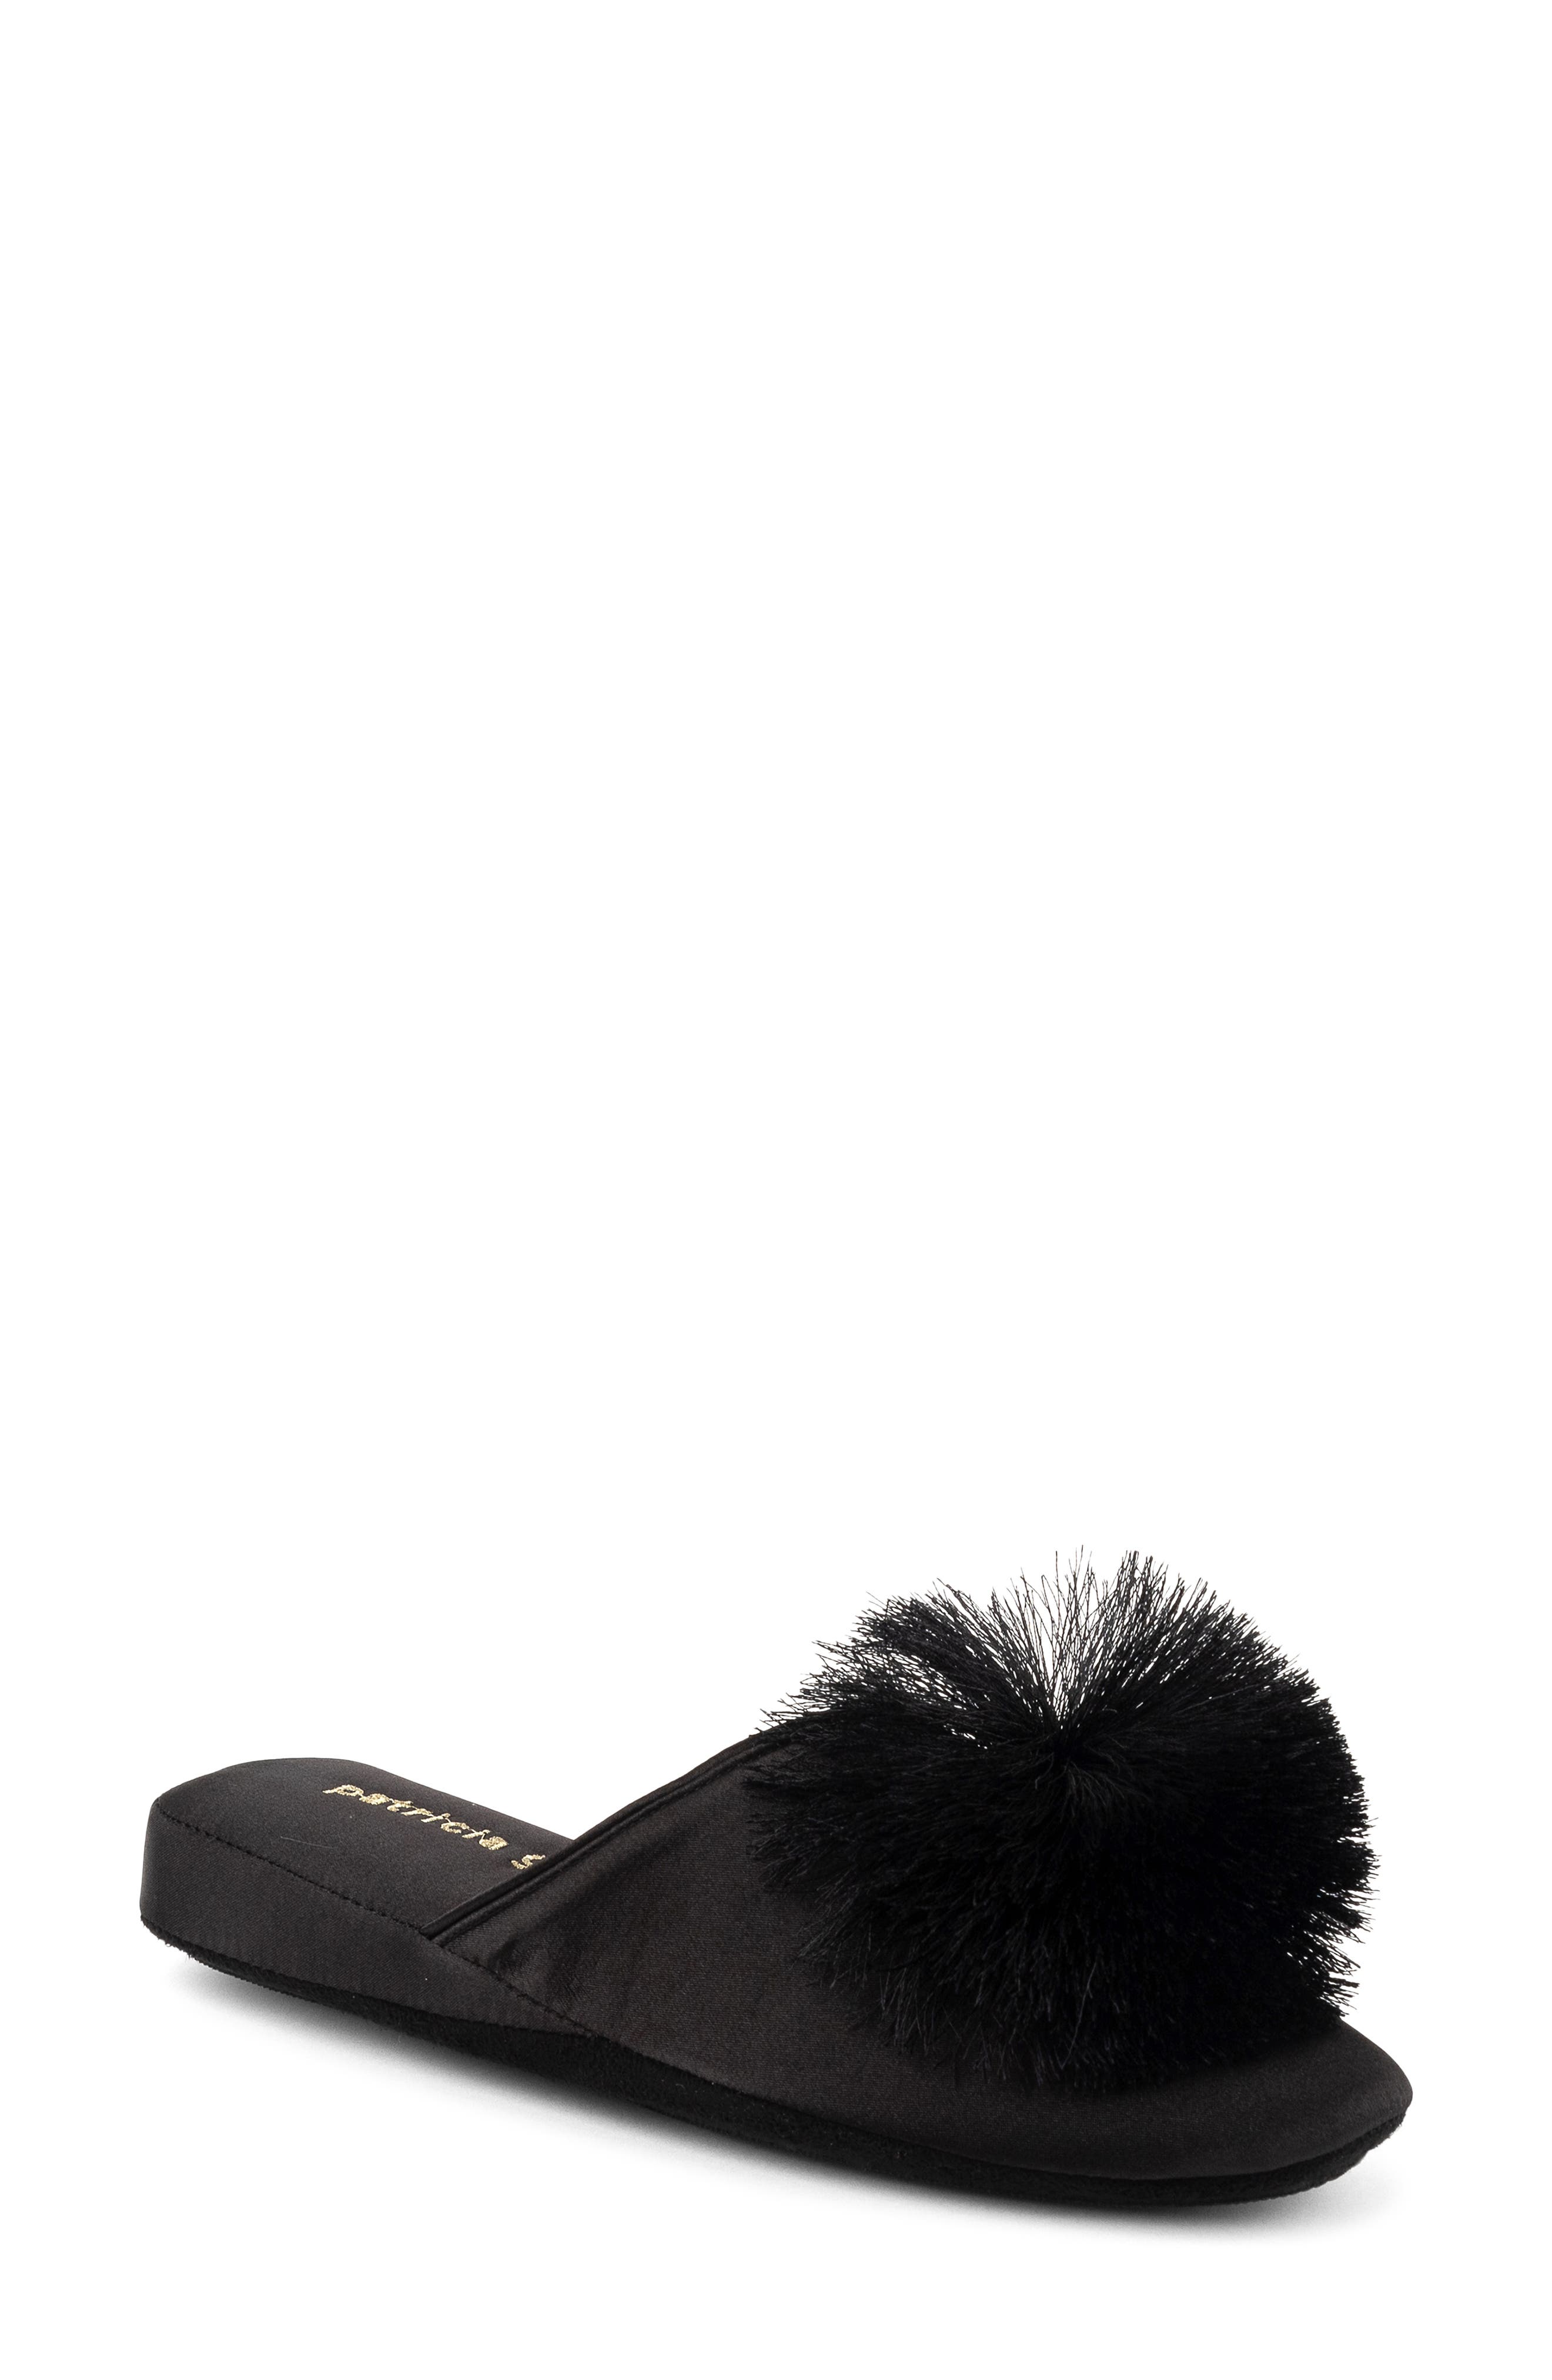 patricia green slippers nordstrom